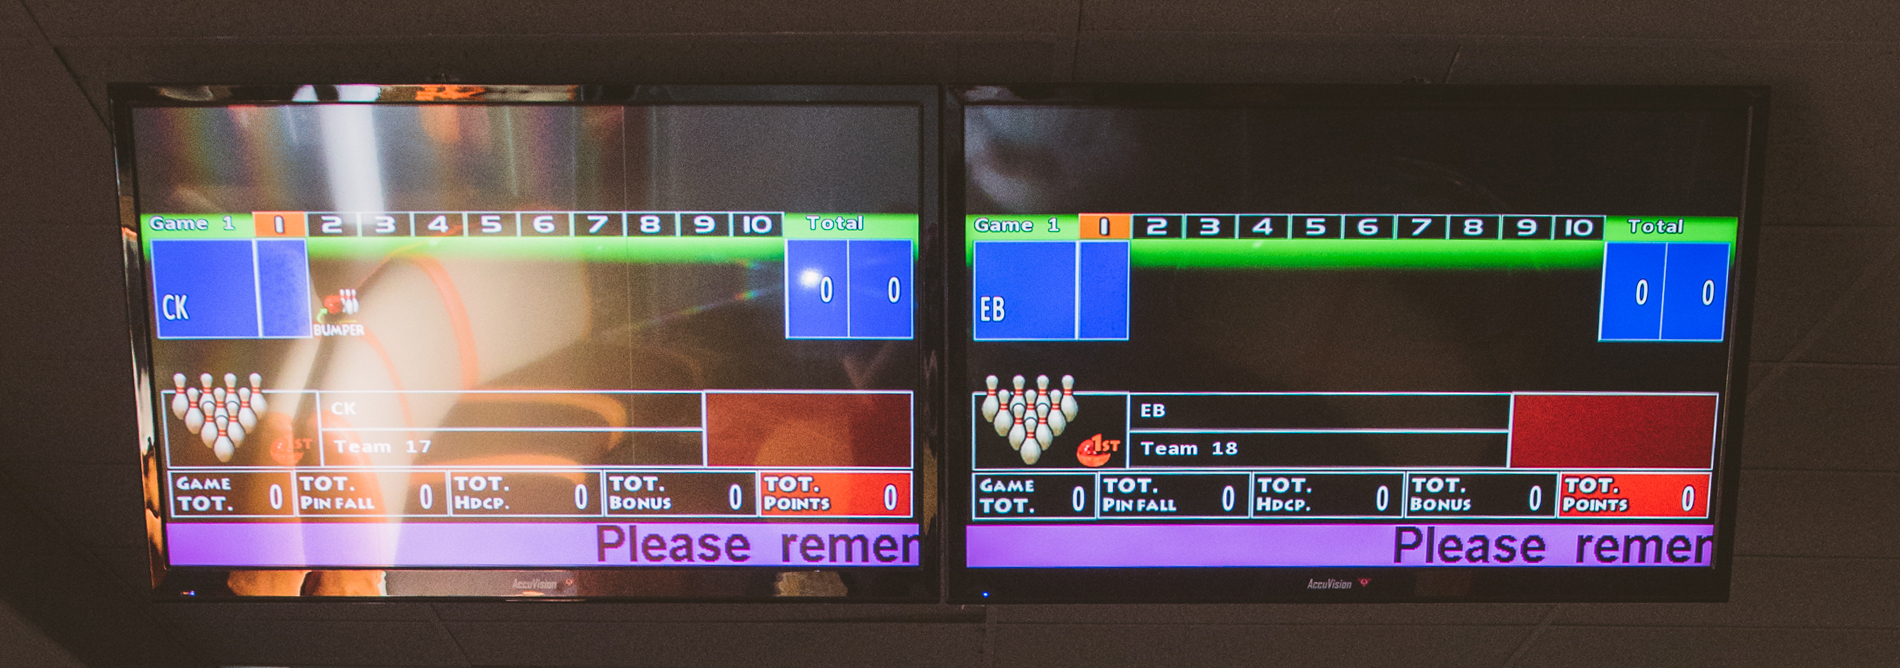 Bowling-QubicaAMF-Accuvision-Monitors-Features-banner.jpg